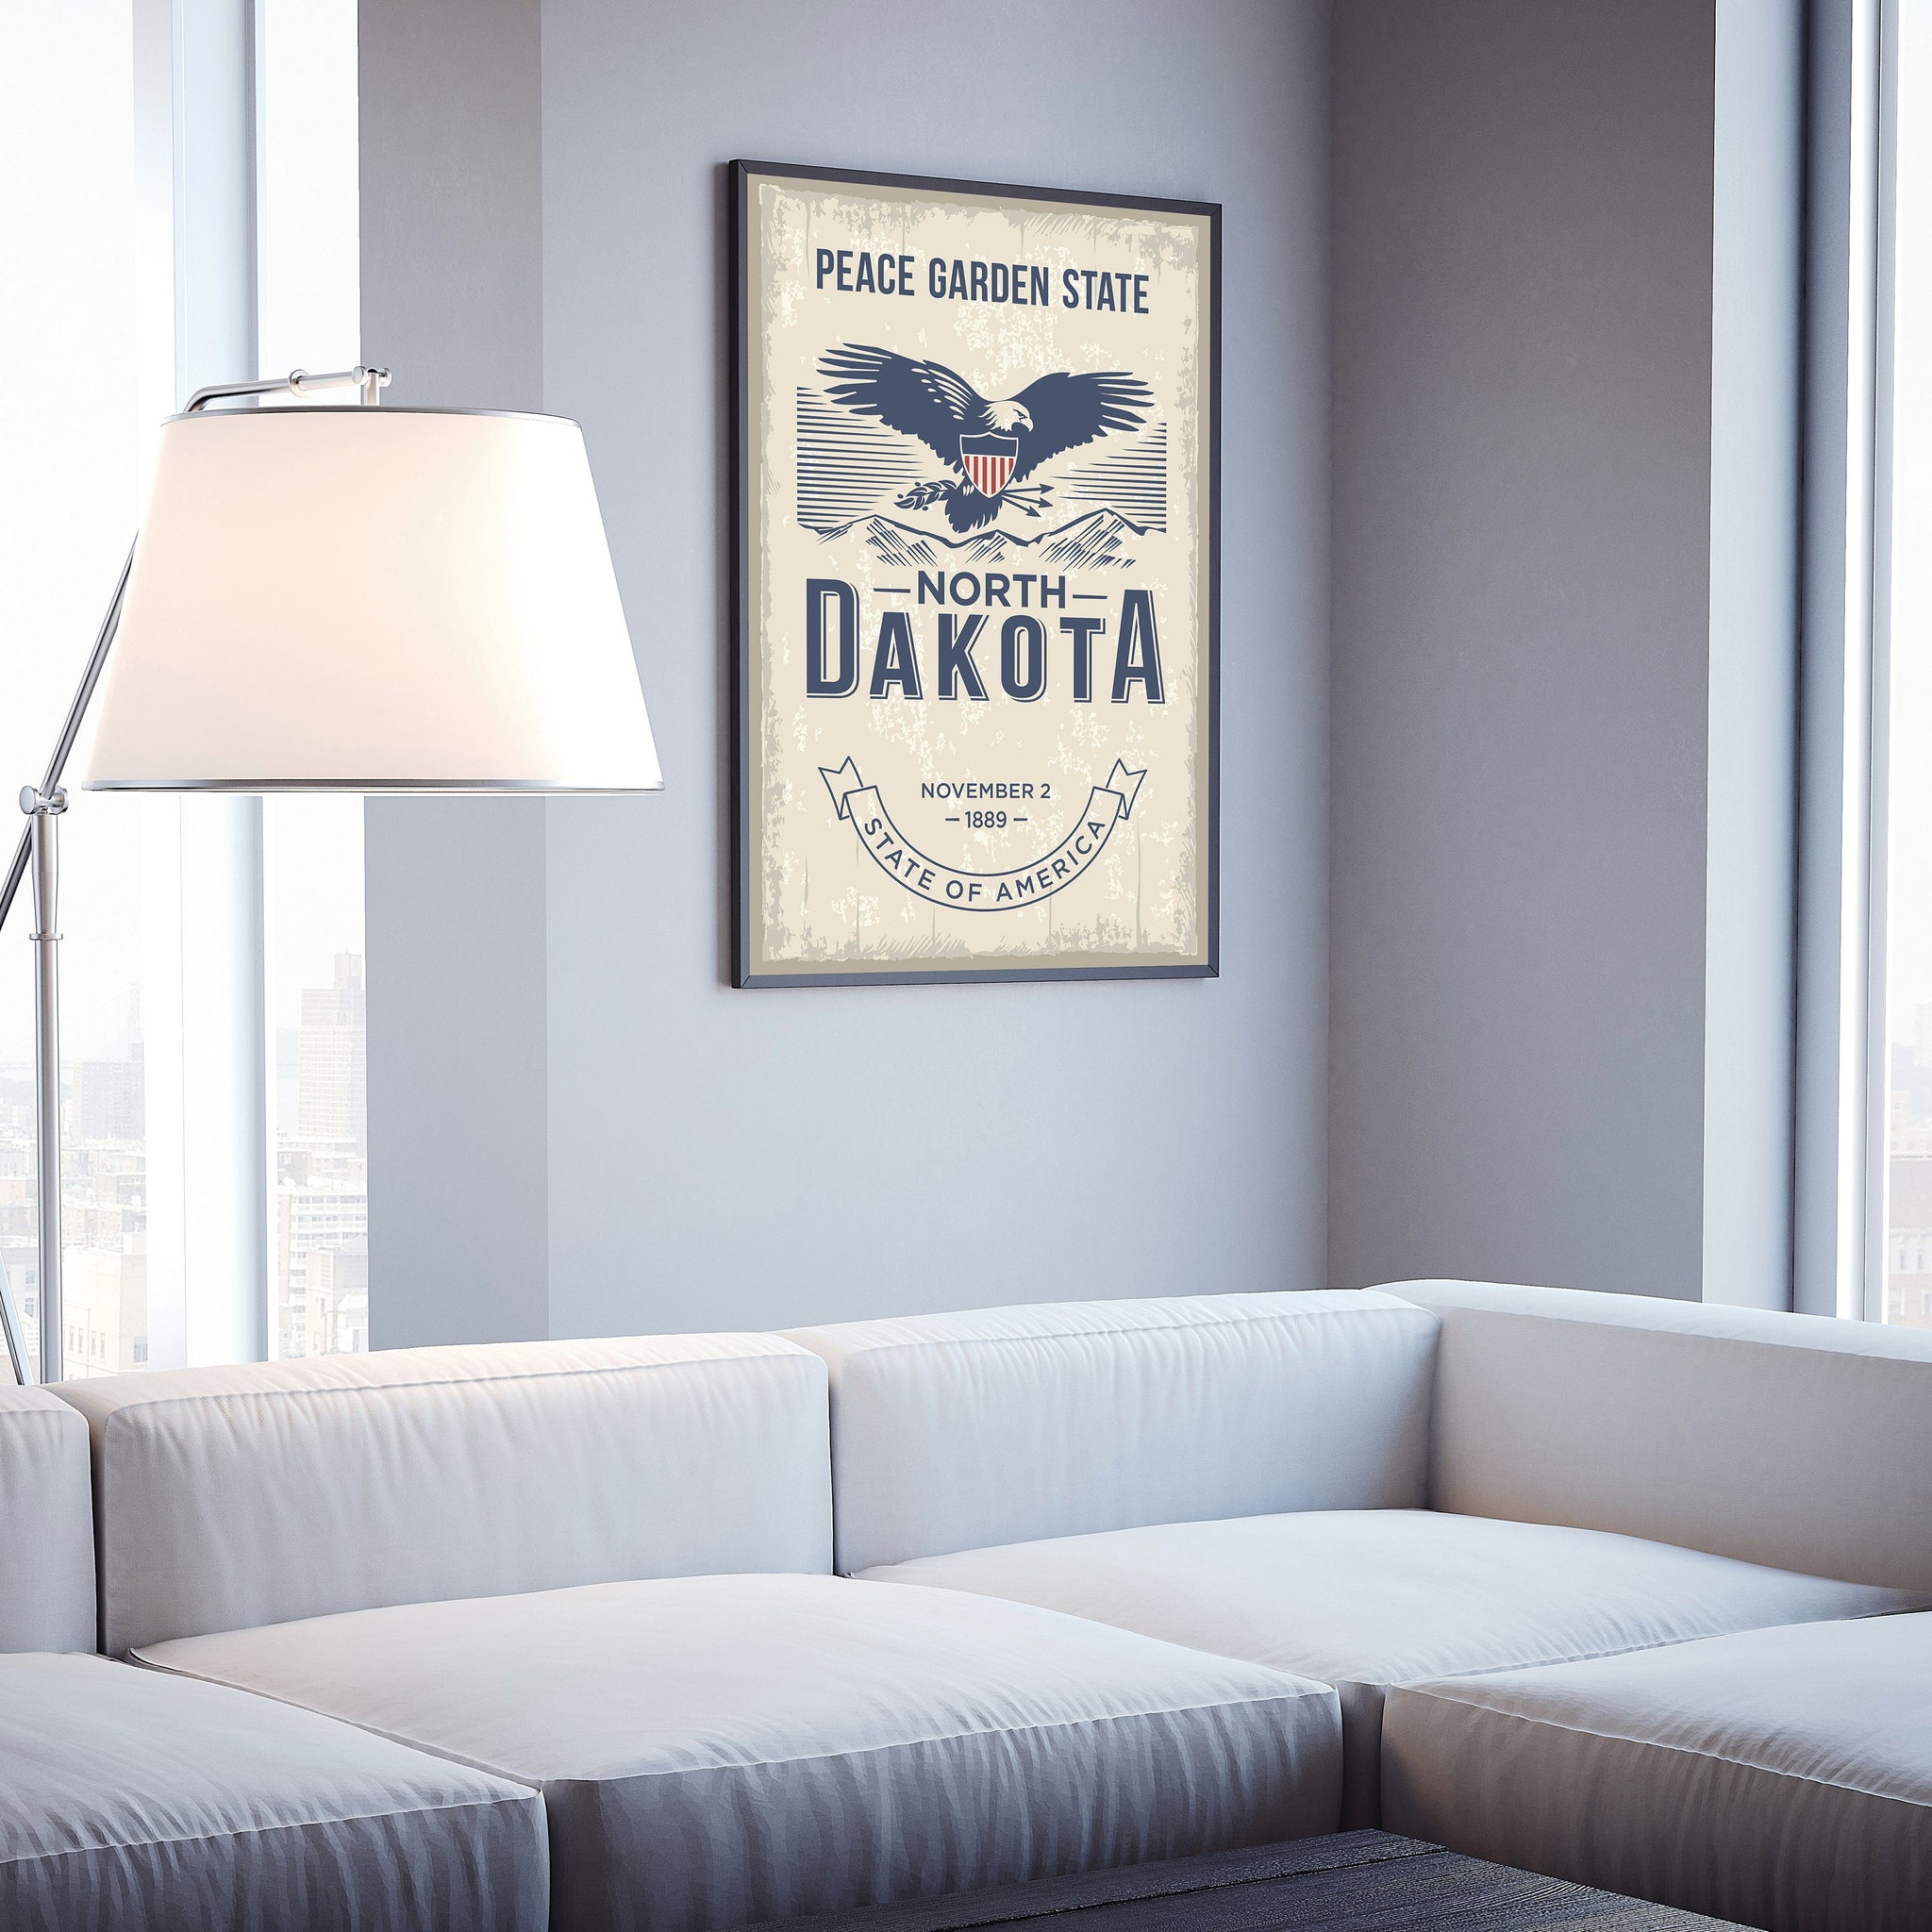 North Dakota State Symbol Poster, State Poster Print, North Dakota State Emblem Poster, Retro Travel State Poster, Home and Office Wall Art